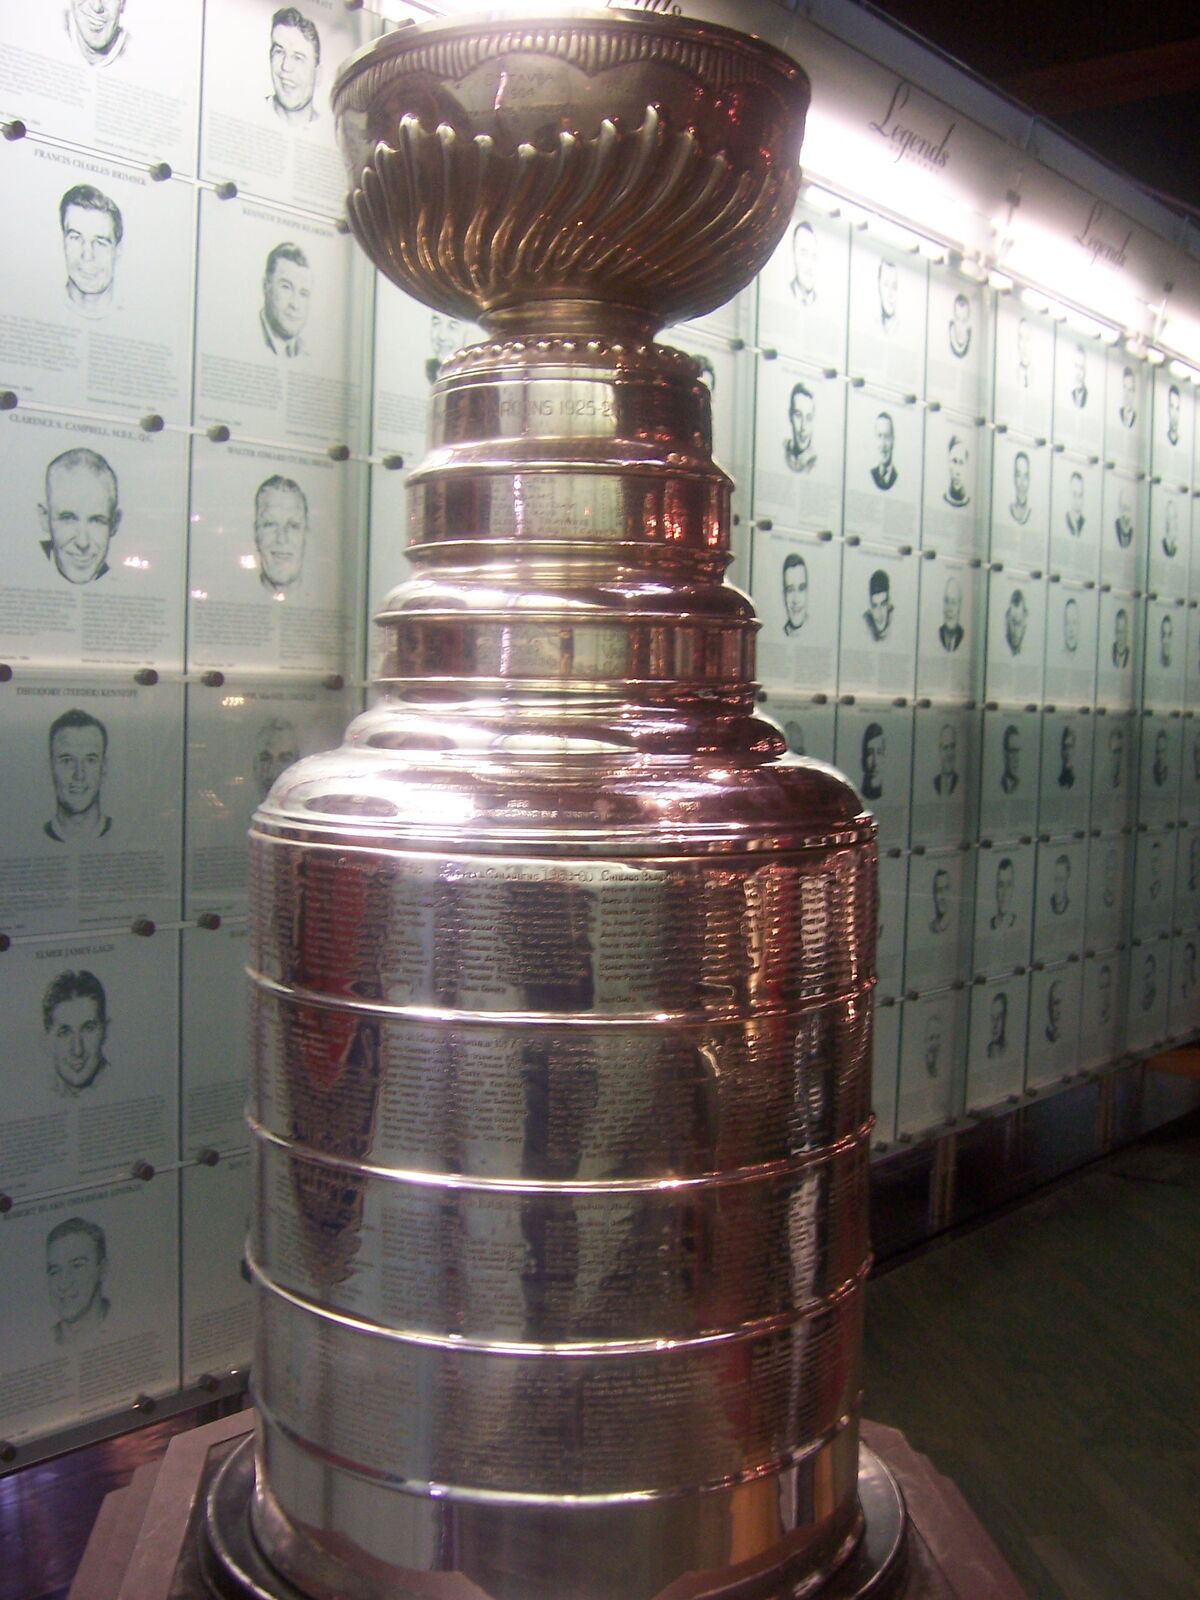 Quirks of the Stanley Cup: Examining the evolution and oddities of